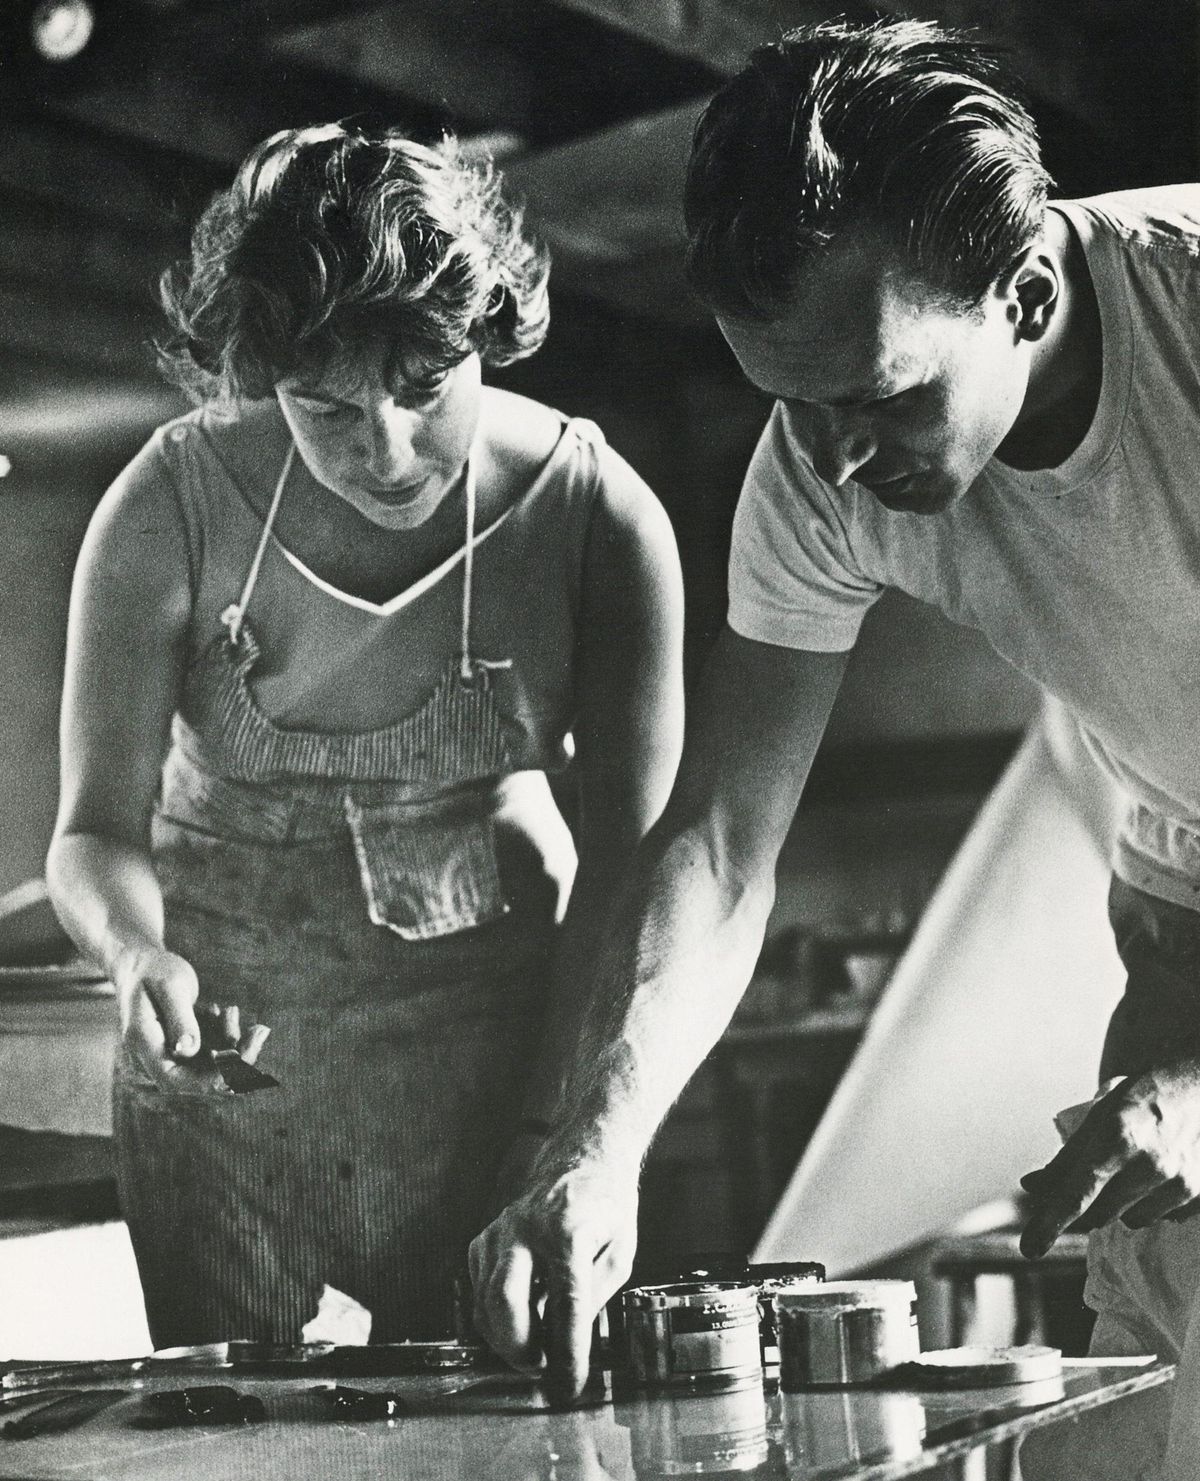 Helen Frankenthaler at work with an unidentified man in her studio in West Islip, New York, 1964 Science History Images / Alamy Stock Photo